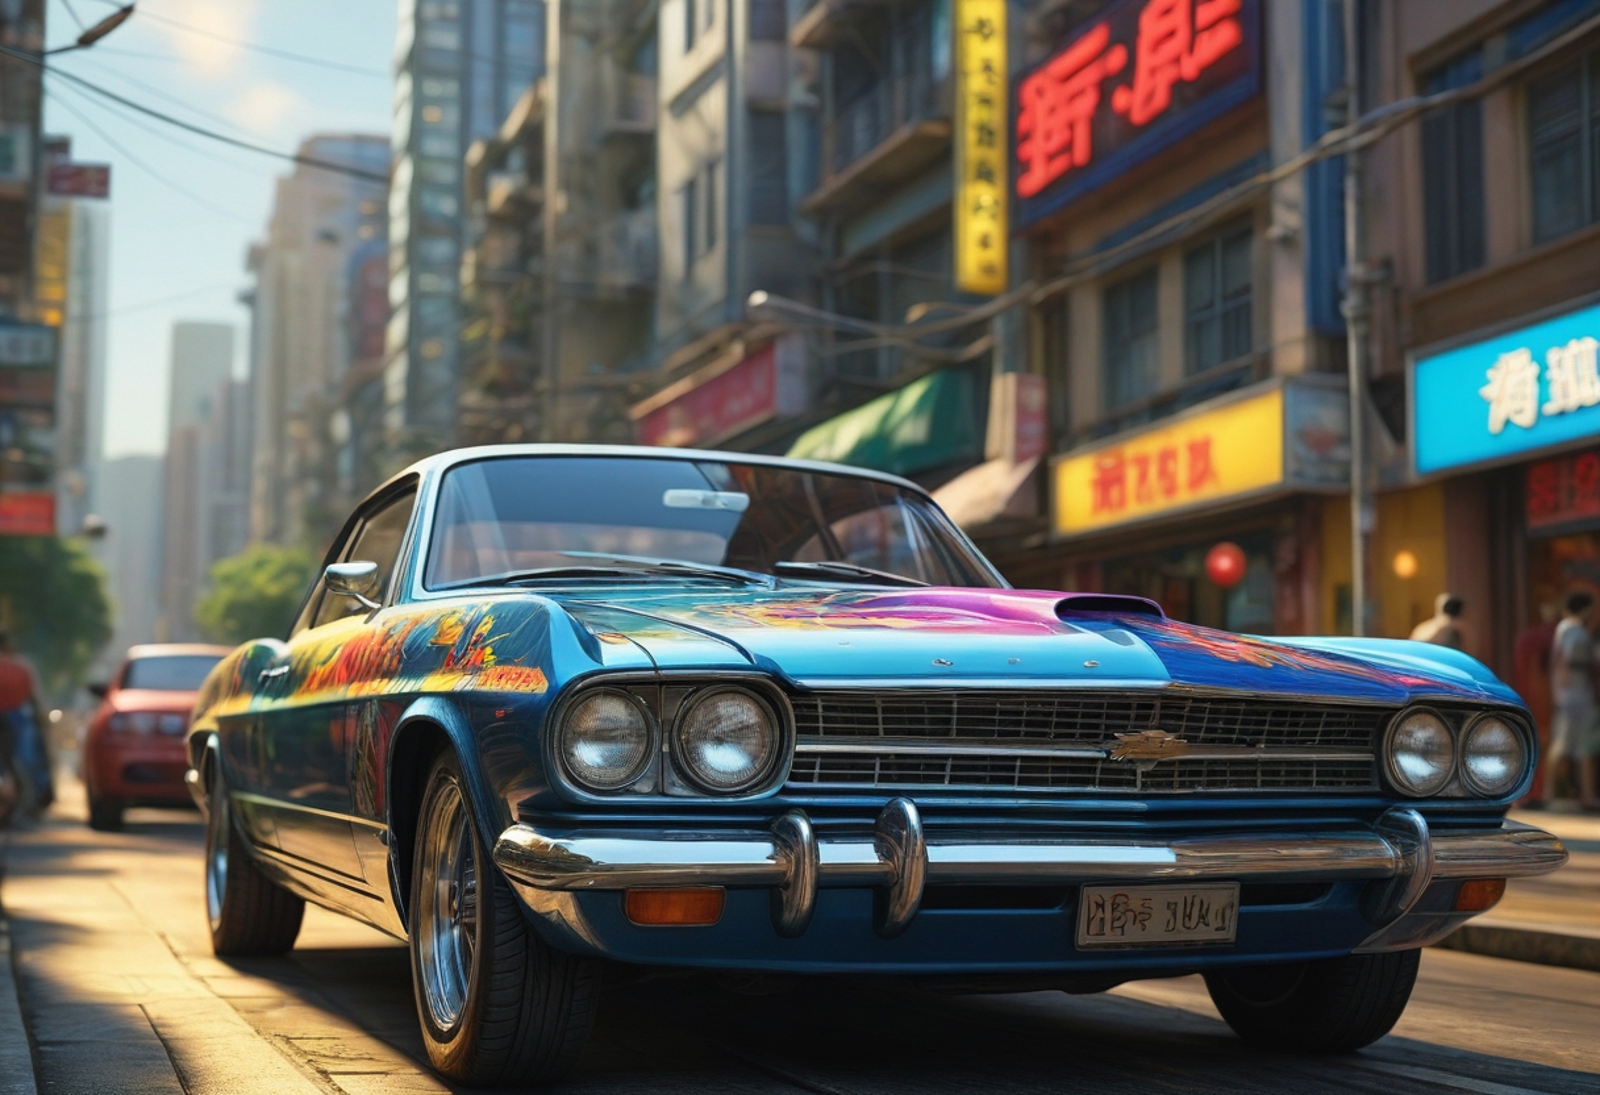 A colorful blue and white classic car driving down a city street.